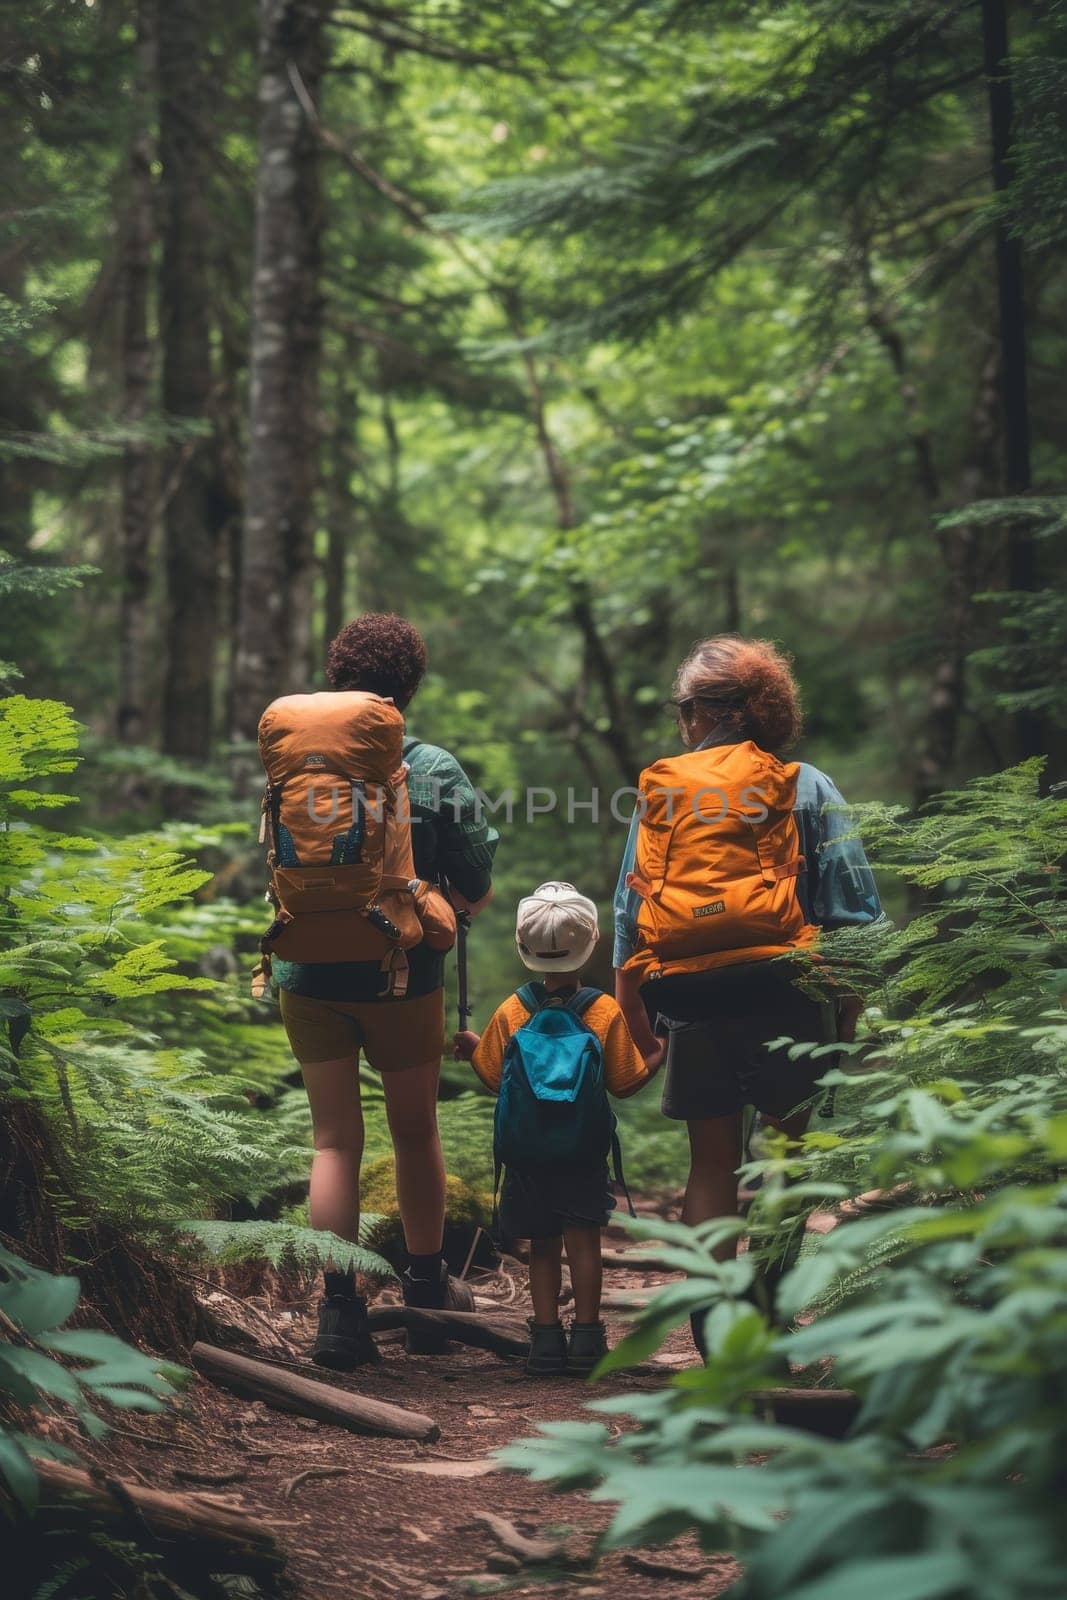 Mother and young child, both with backpacks, walking on a forest trail surrounded by greenery